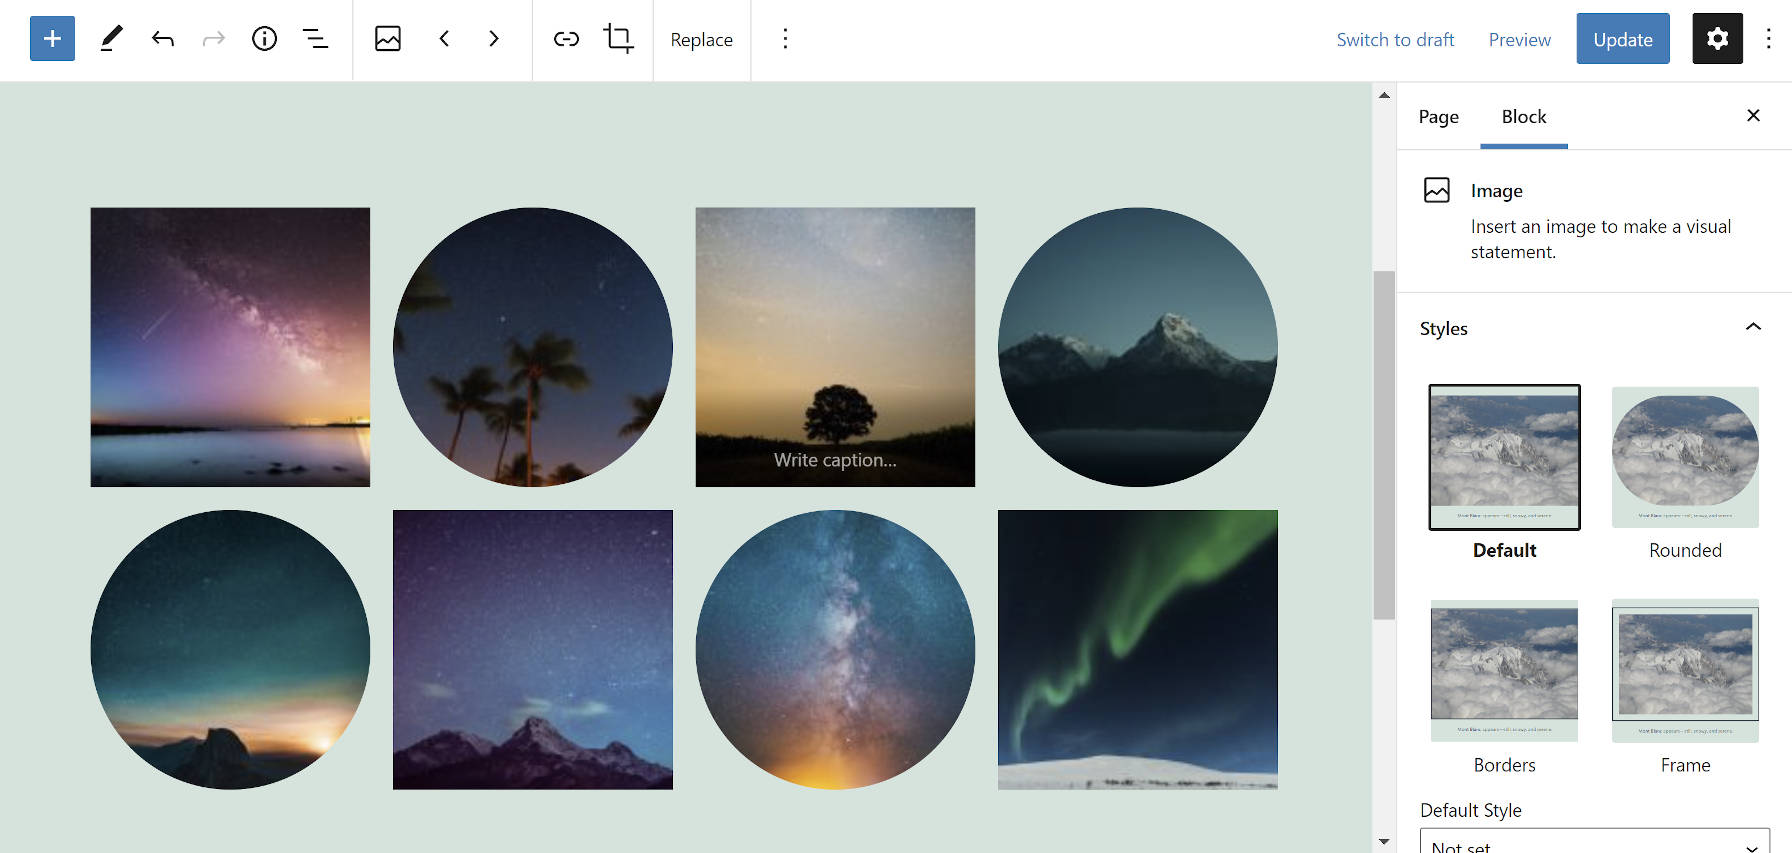 Gallery block in the WordPress editor with alternating round and square image shapes.